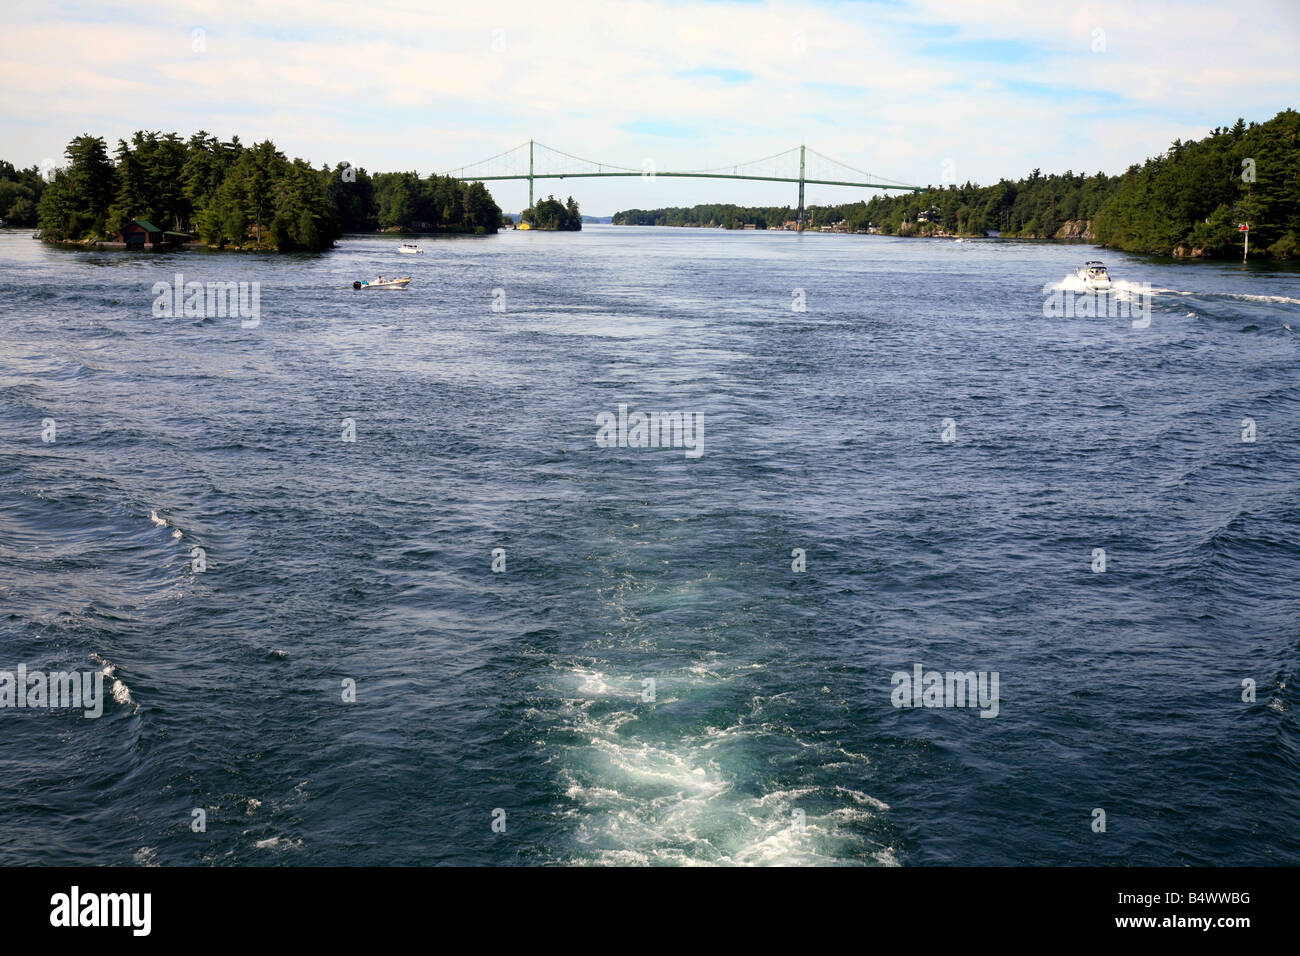 The 1000 Islands in the St.Lawrence River in Ontario Canada/USA Stock Photo